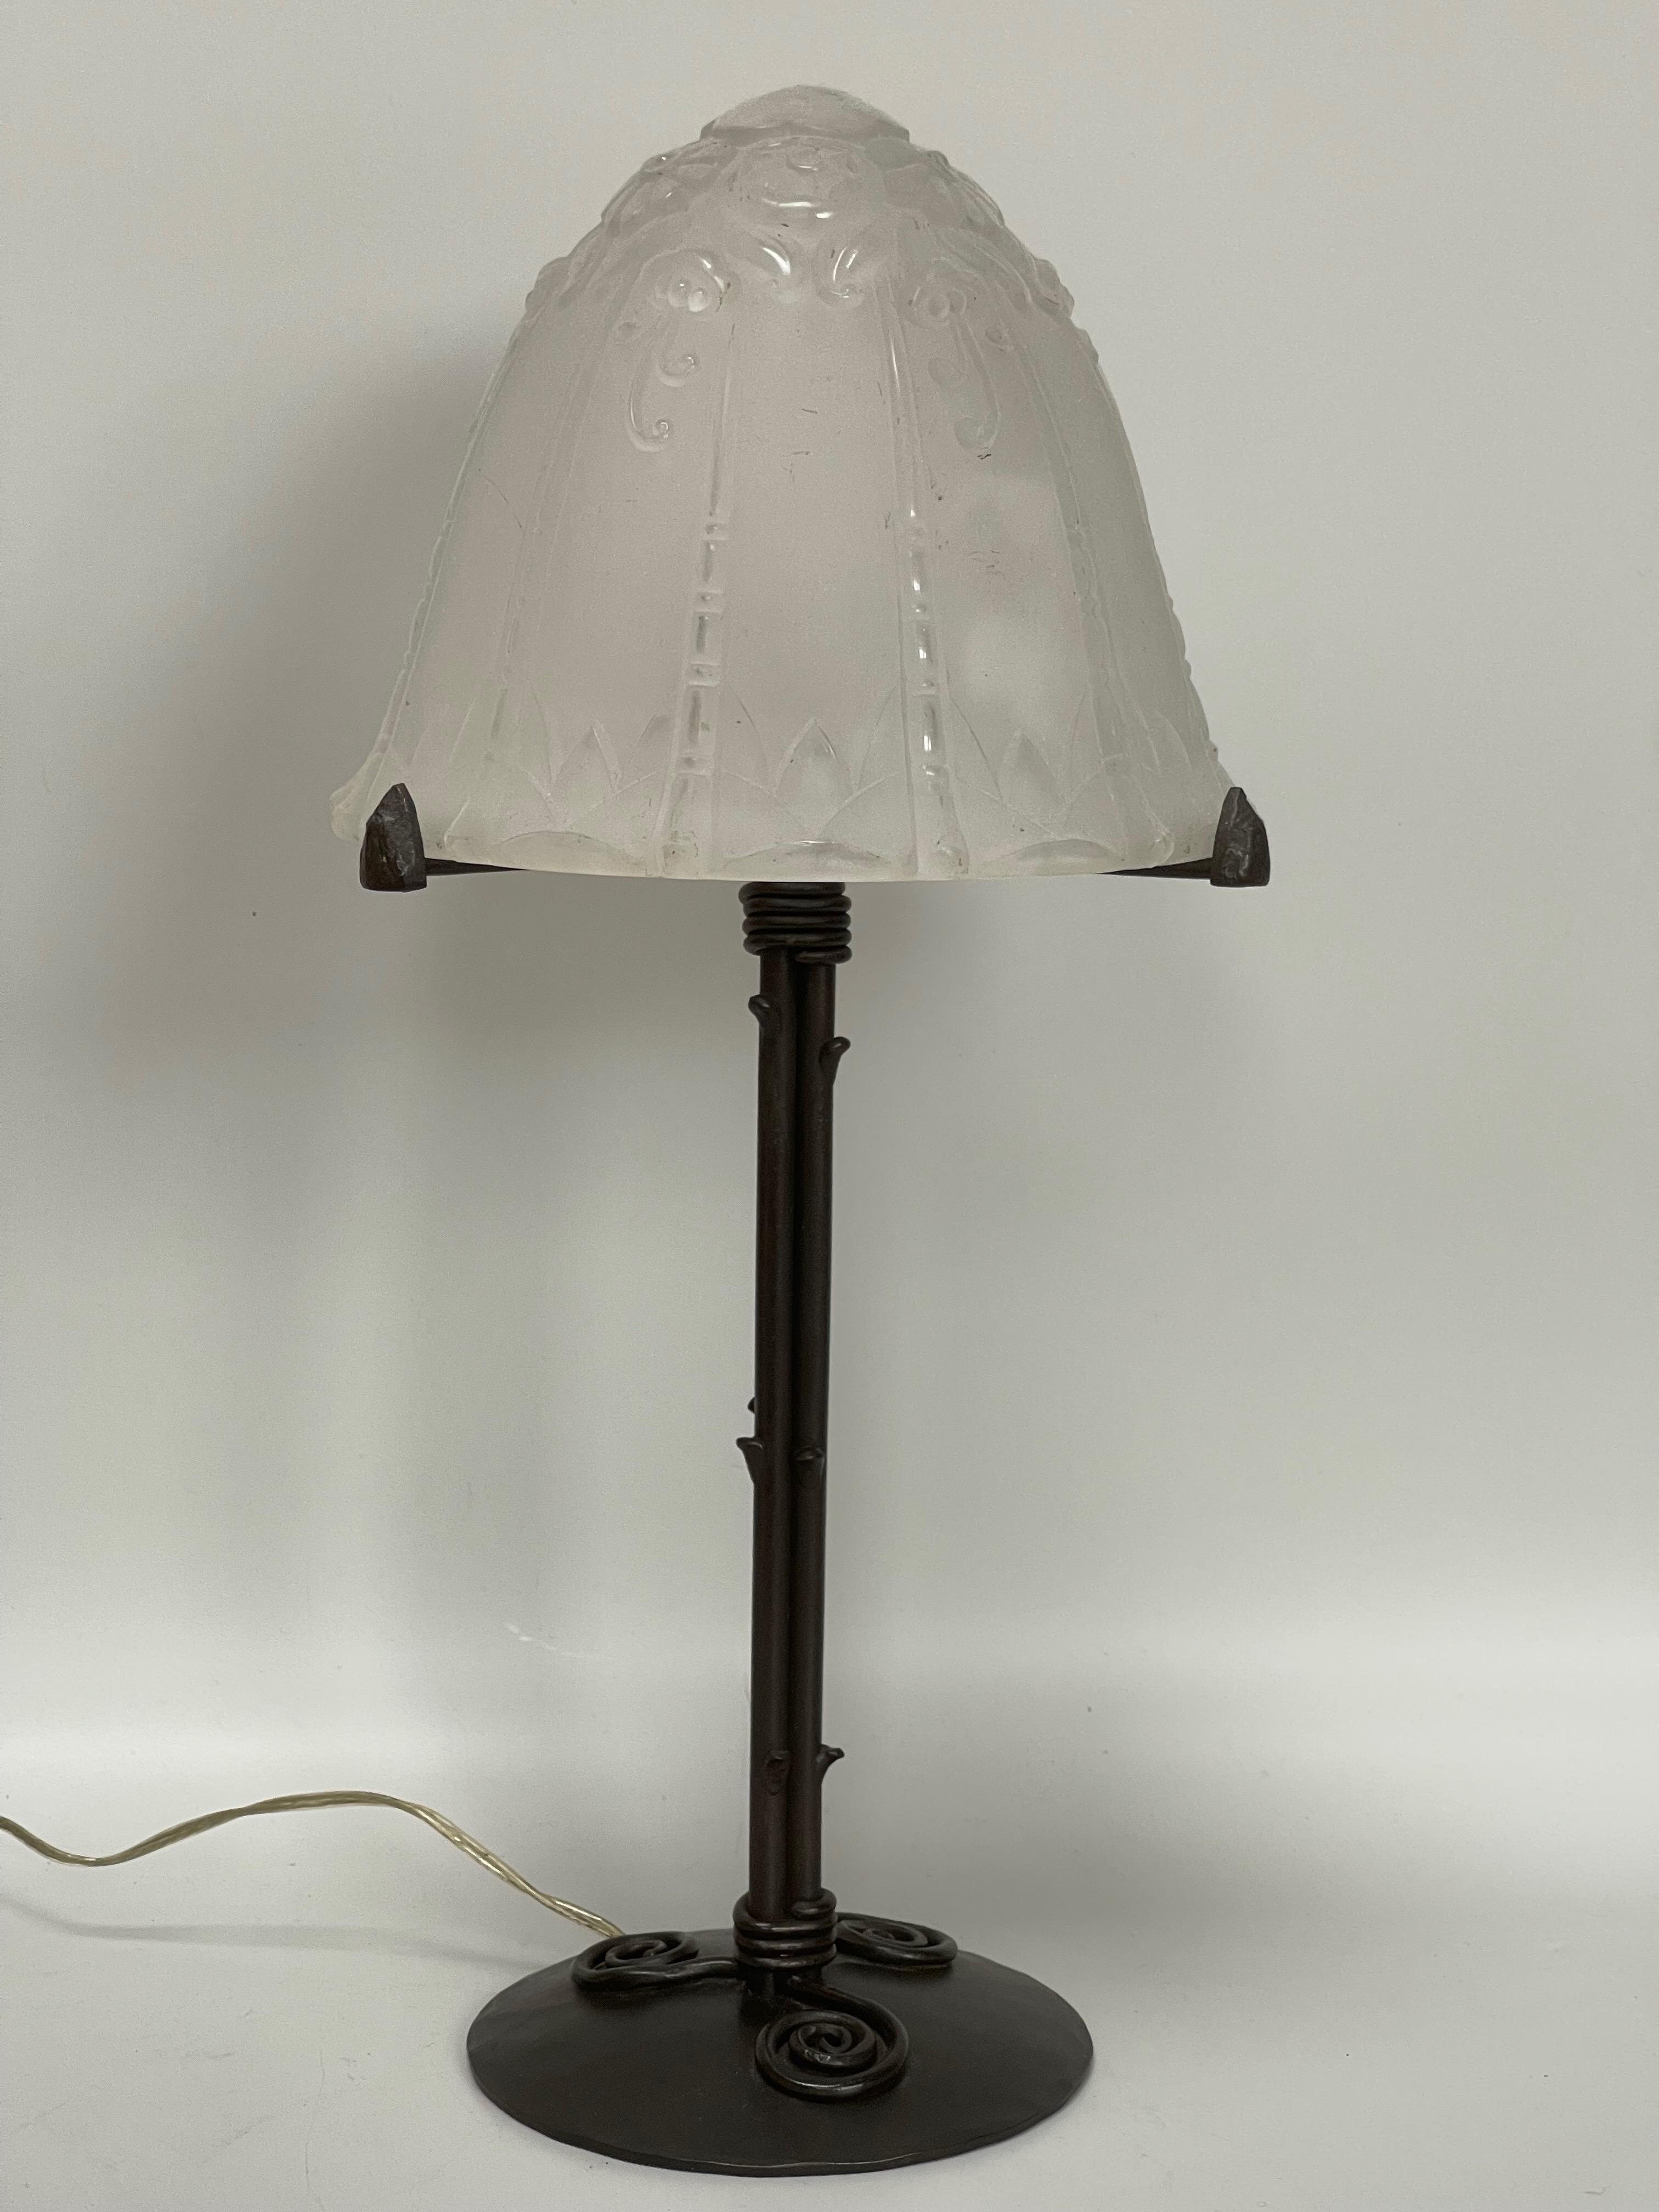 Art deco lamp circa 1930.
Wrought iron foot stamped Robert.
Molded glass shell with unsigned floral decoration. This model is very well known in Lorraine.
Electrified and in very good condition.

Total height: 37 cm
Base diameter: 12 cm
Shell